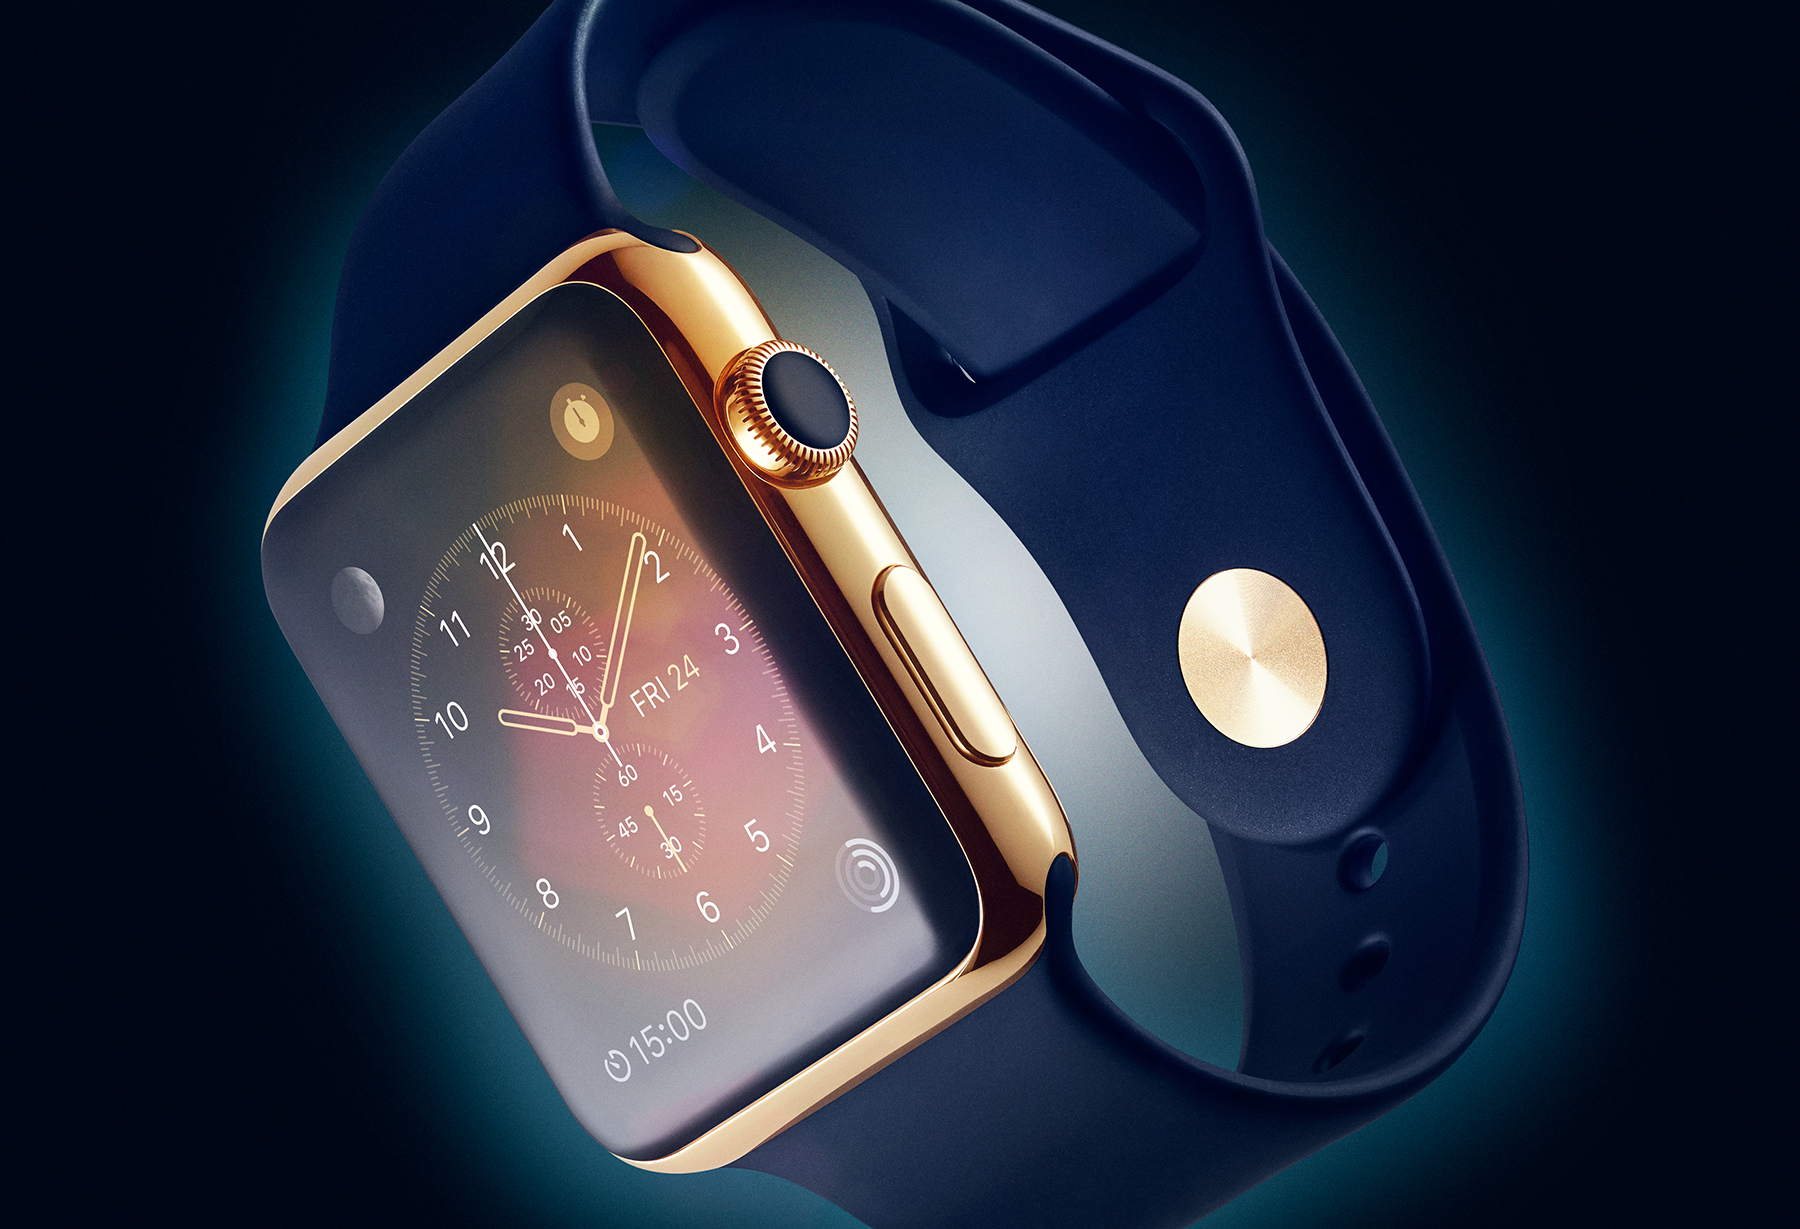 apple watch wallpaper hd,gadget,product,electronic device,technology,mobile phone